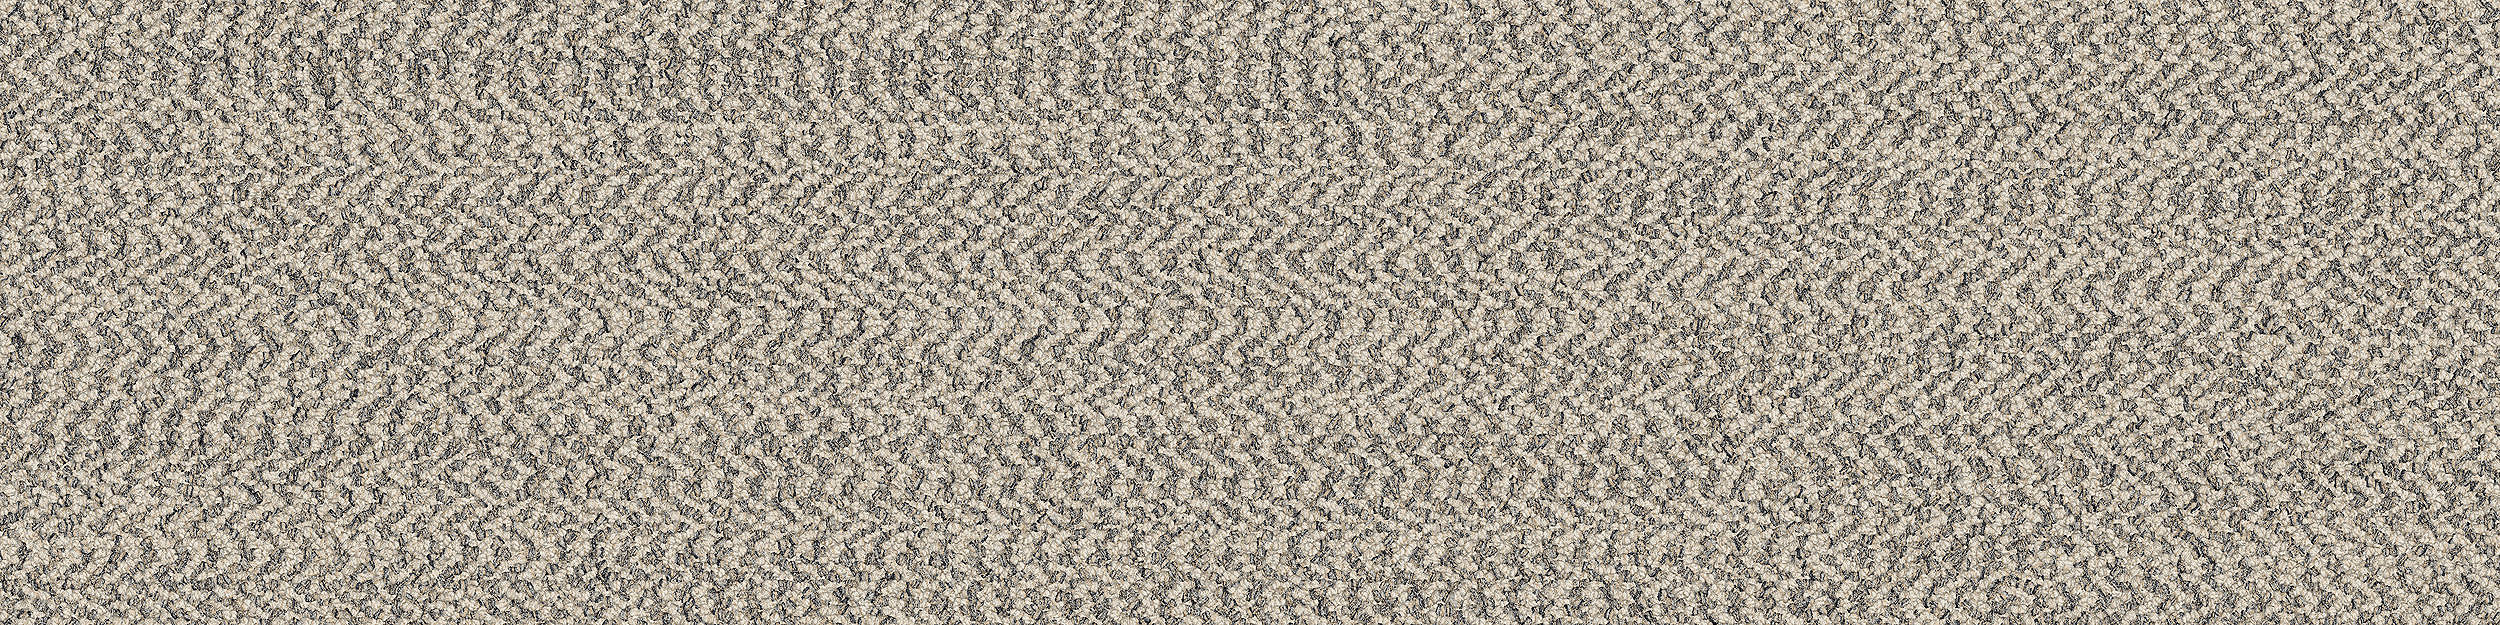 Third Space 307 Carpet Tile in Shell image number 3